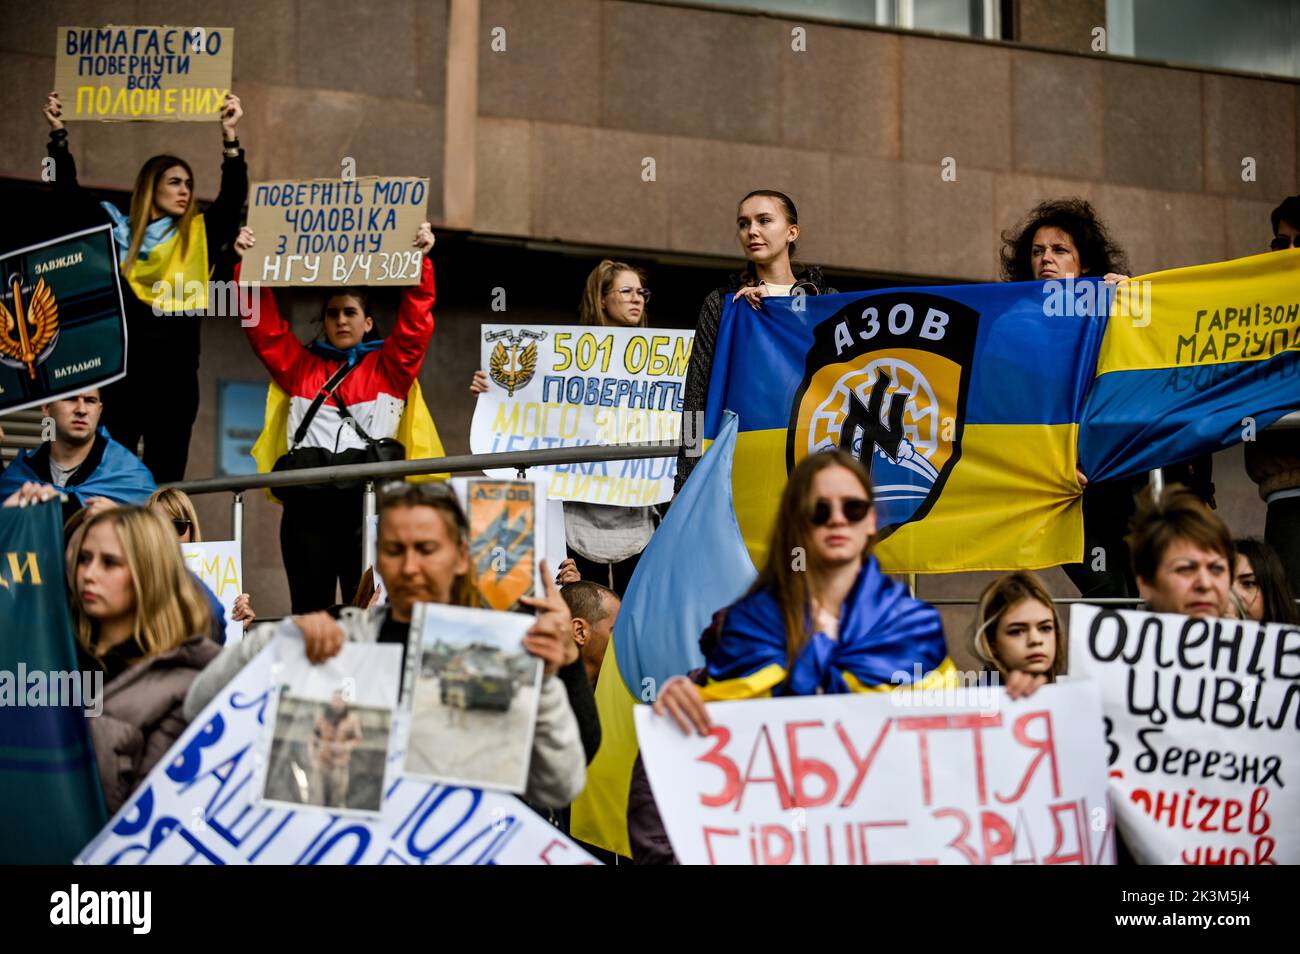 ZAPORIZHZHIA, UKRAINE - SEPTEMBER 25, 2022 - Activists hold placards calling for the release of Mariupol defenders and civilians who are currently in Stock Photo